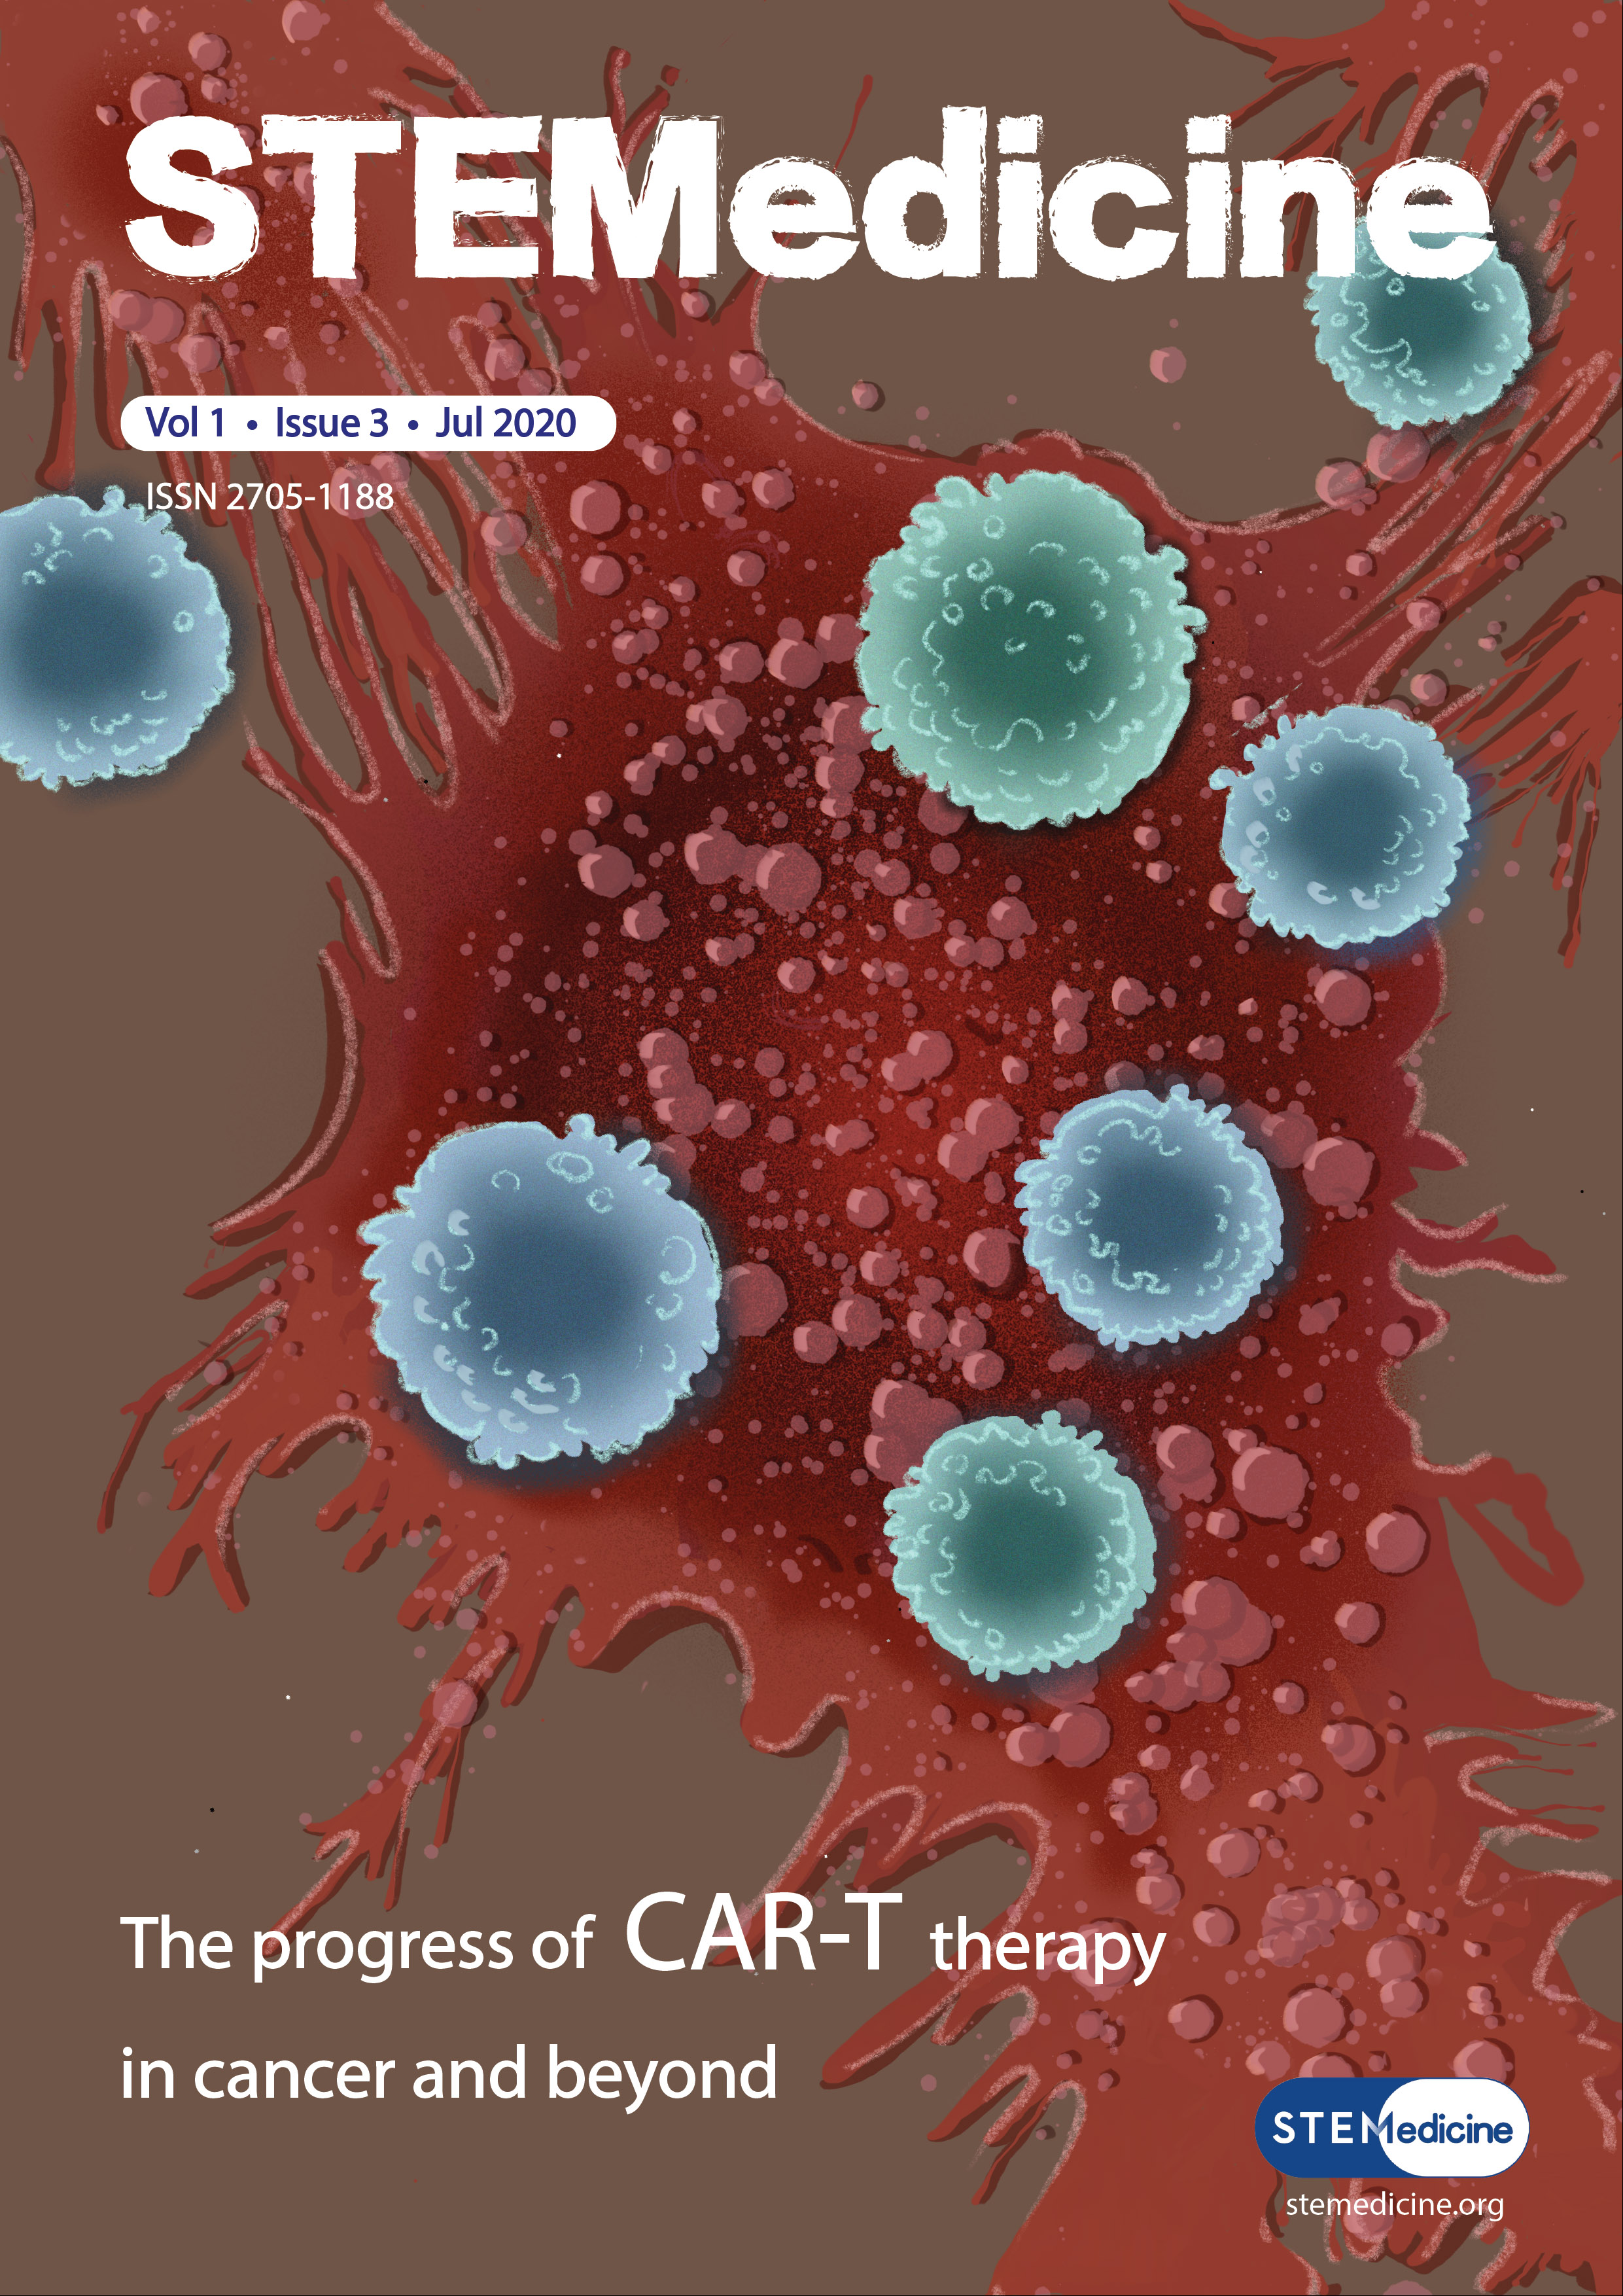 The progress of CAR-T therapy in cancer and beyond